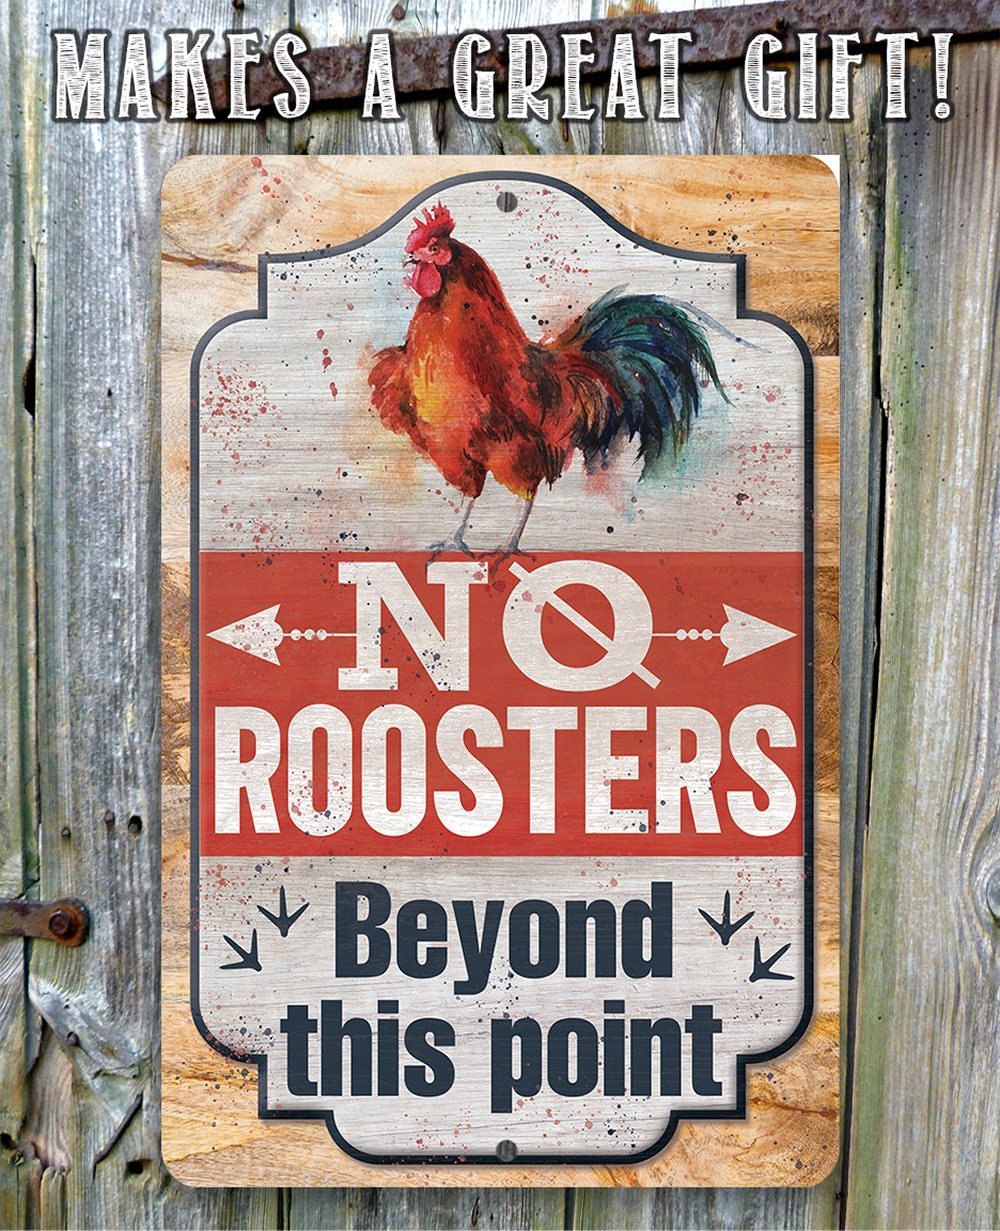 No Roosters Beyond This Point - Metal Sign Metal Sign Lone Star Art 